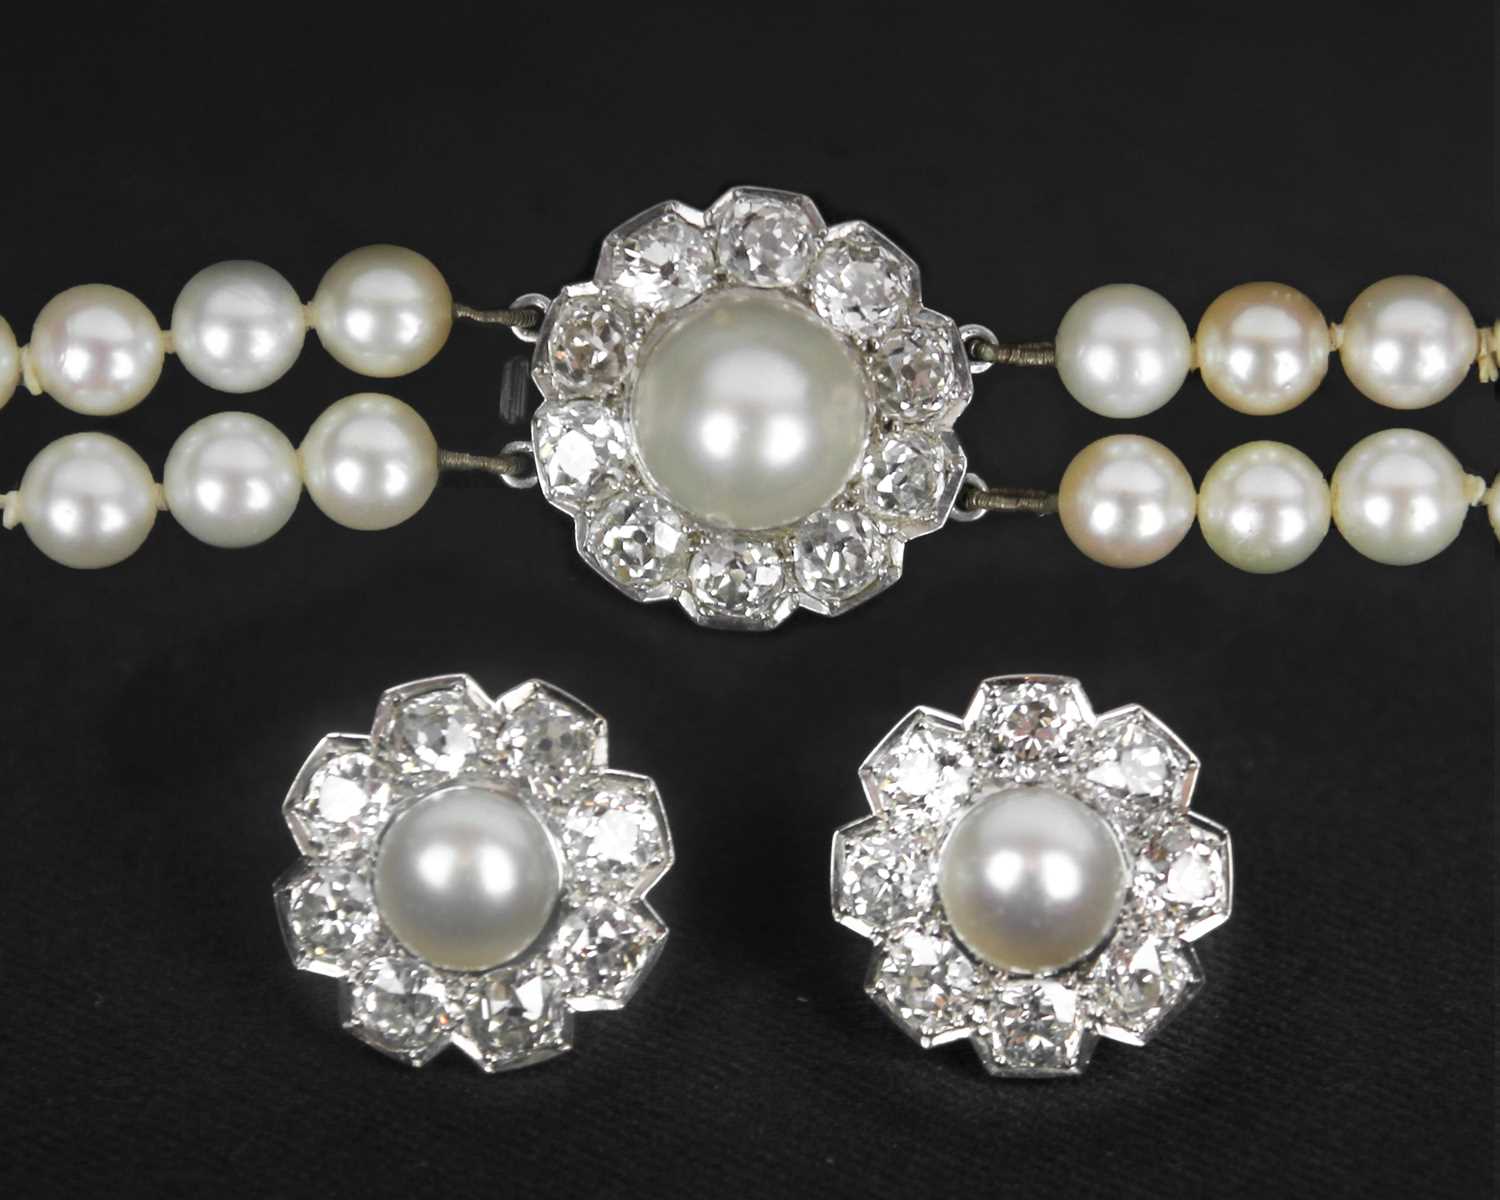 An impressive early 20th century cultured pearl, diamond set, double-row necklace & earrings suite.